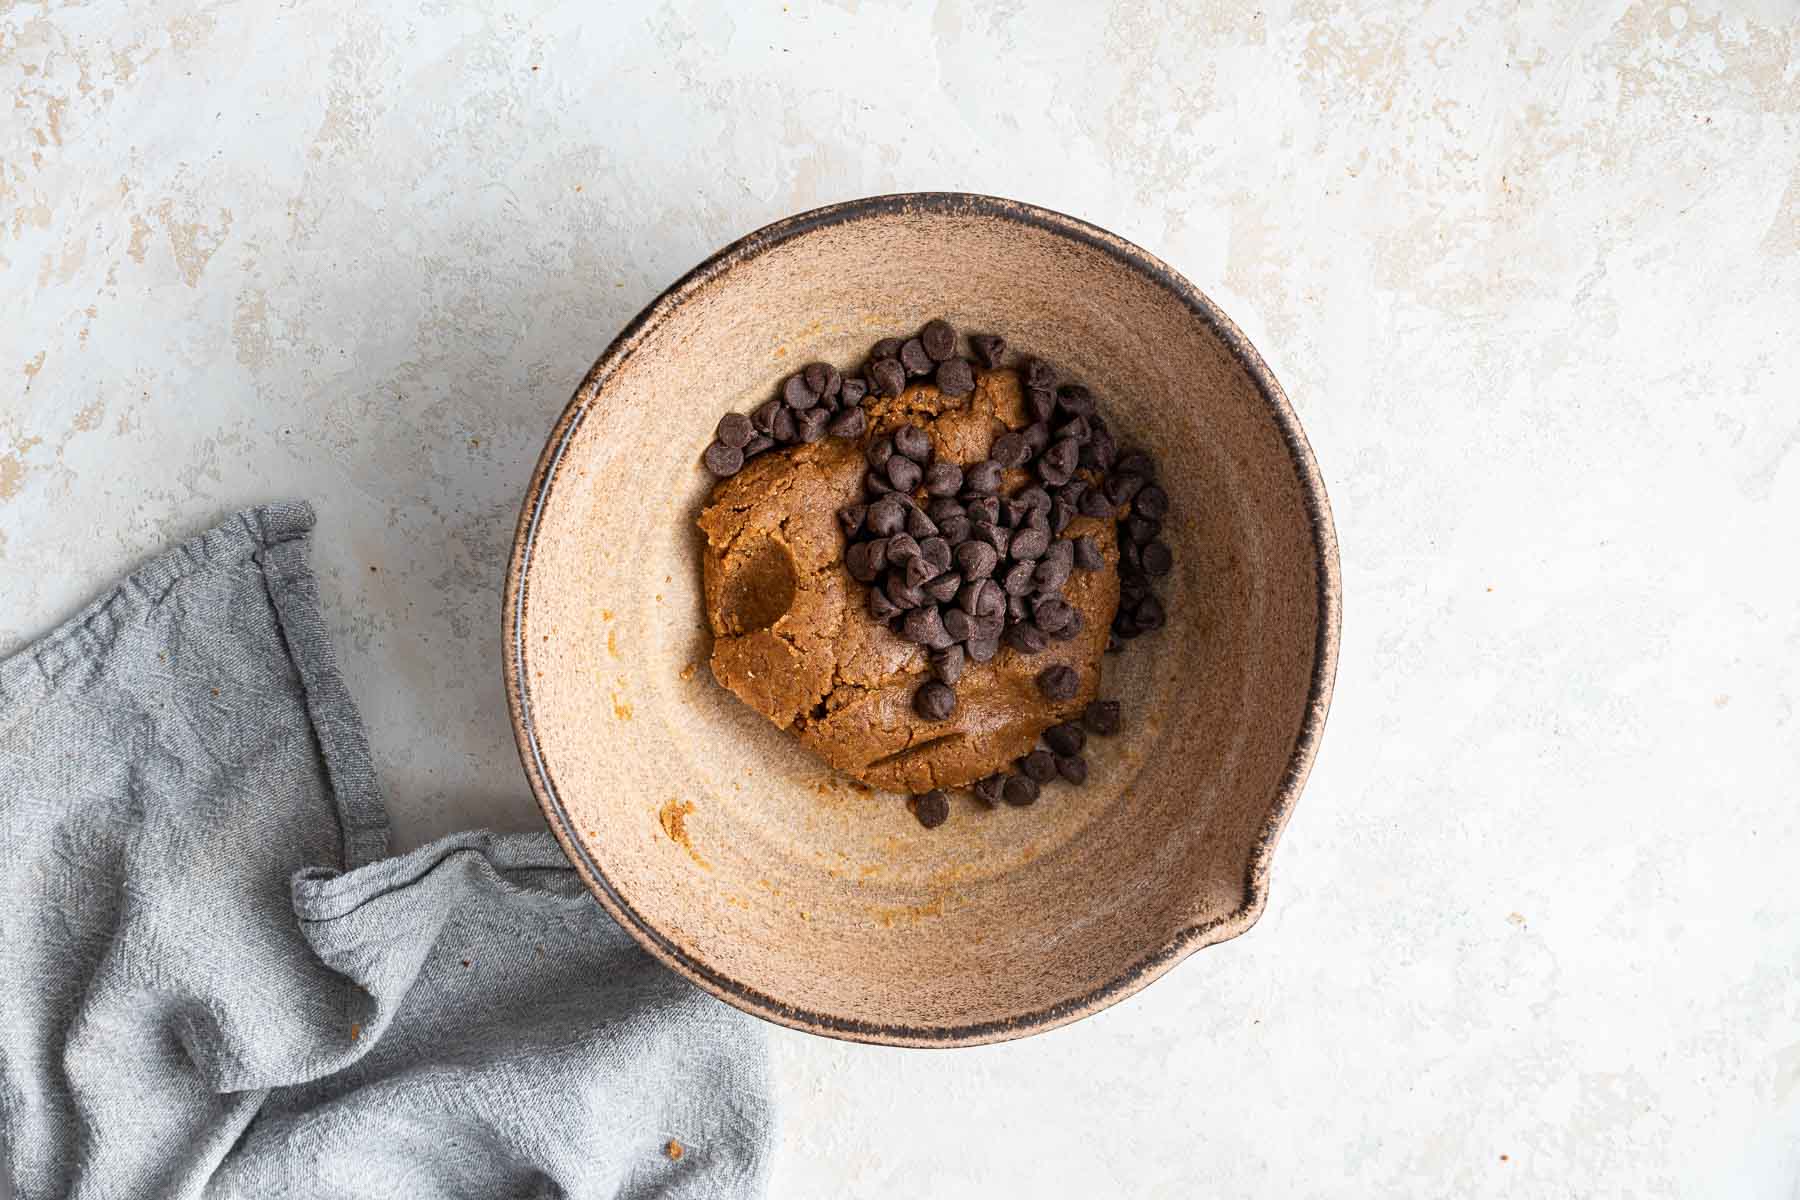 Brown dough in a brown bowl with a scoop of chocolate chips on top.